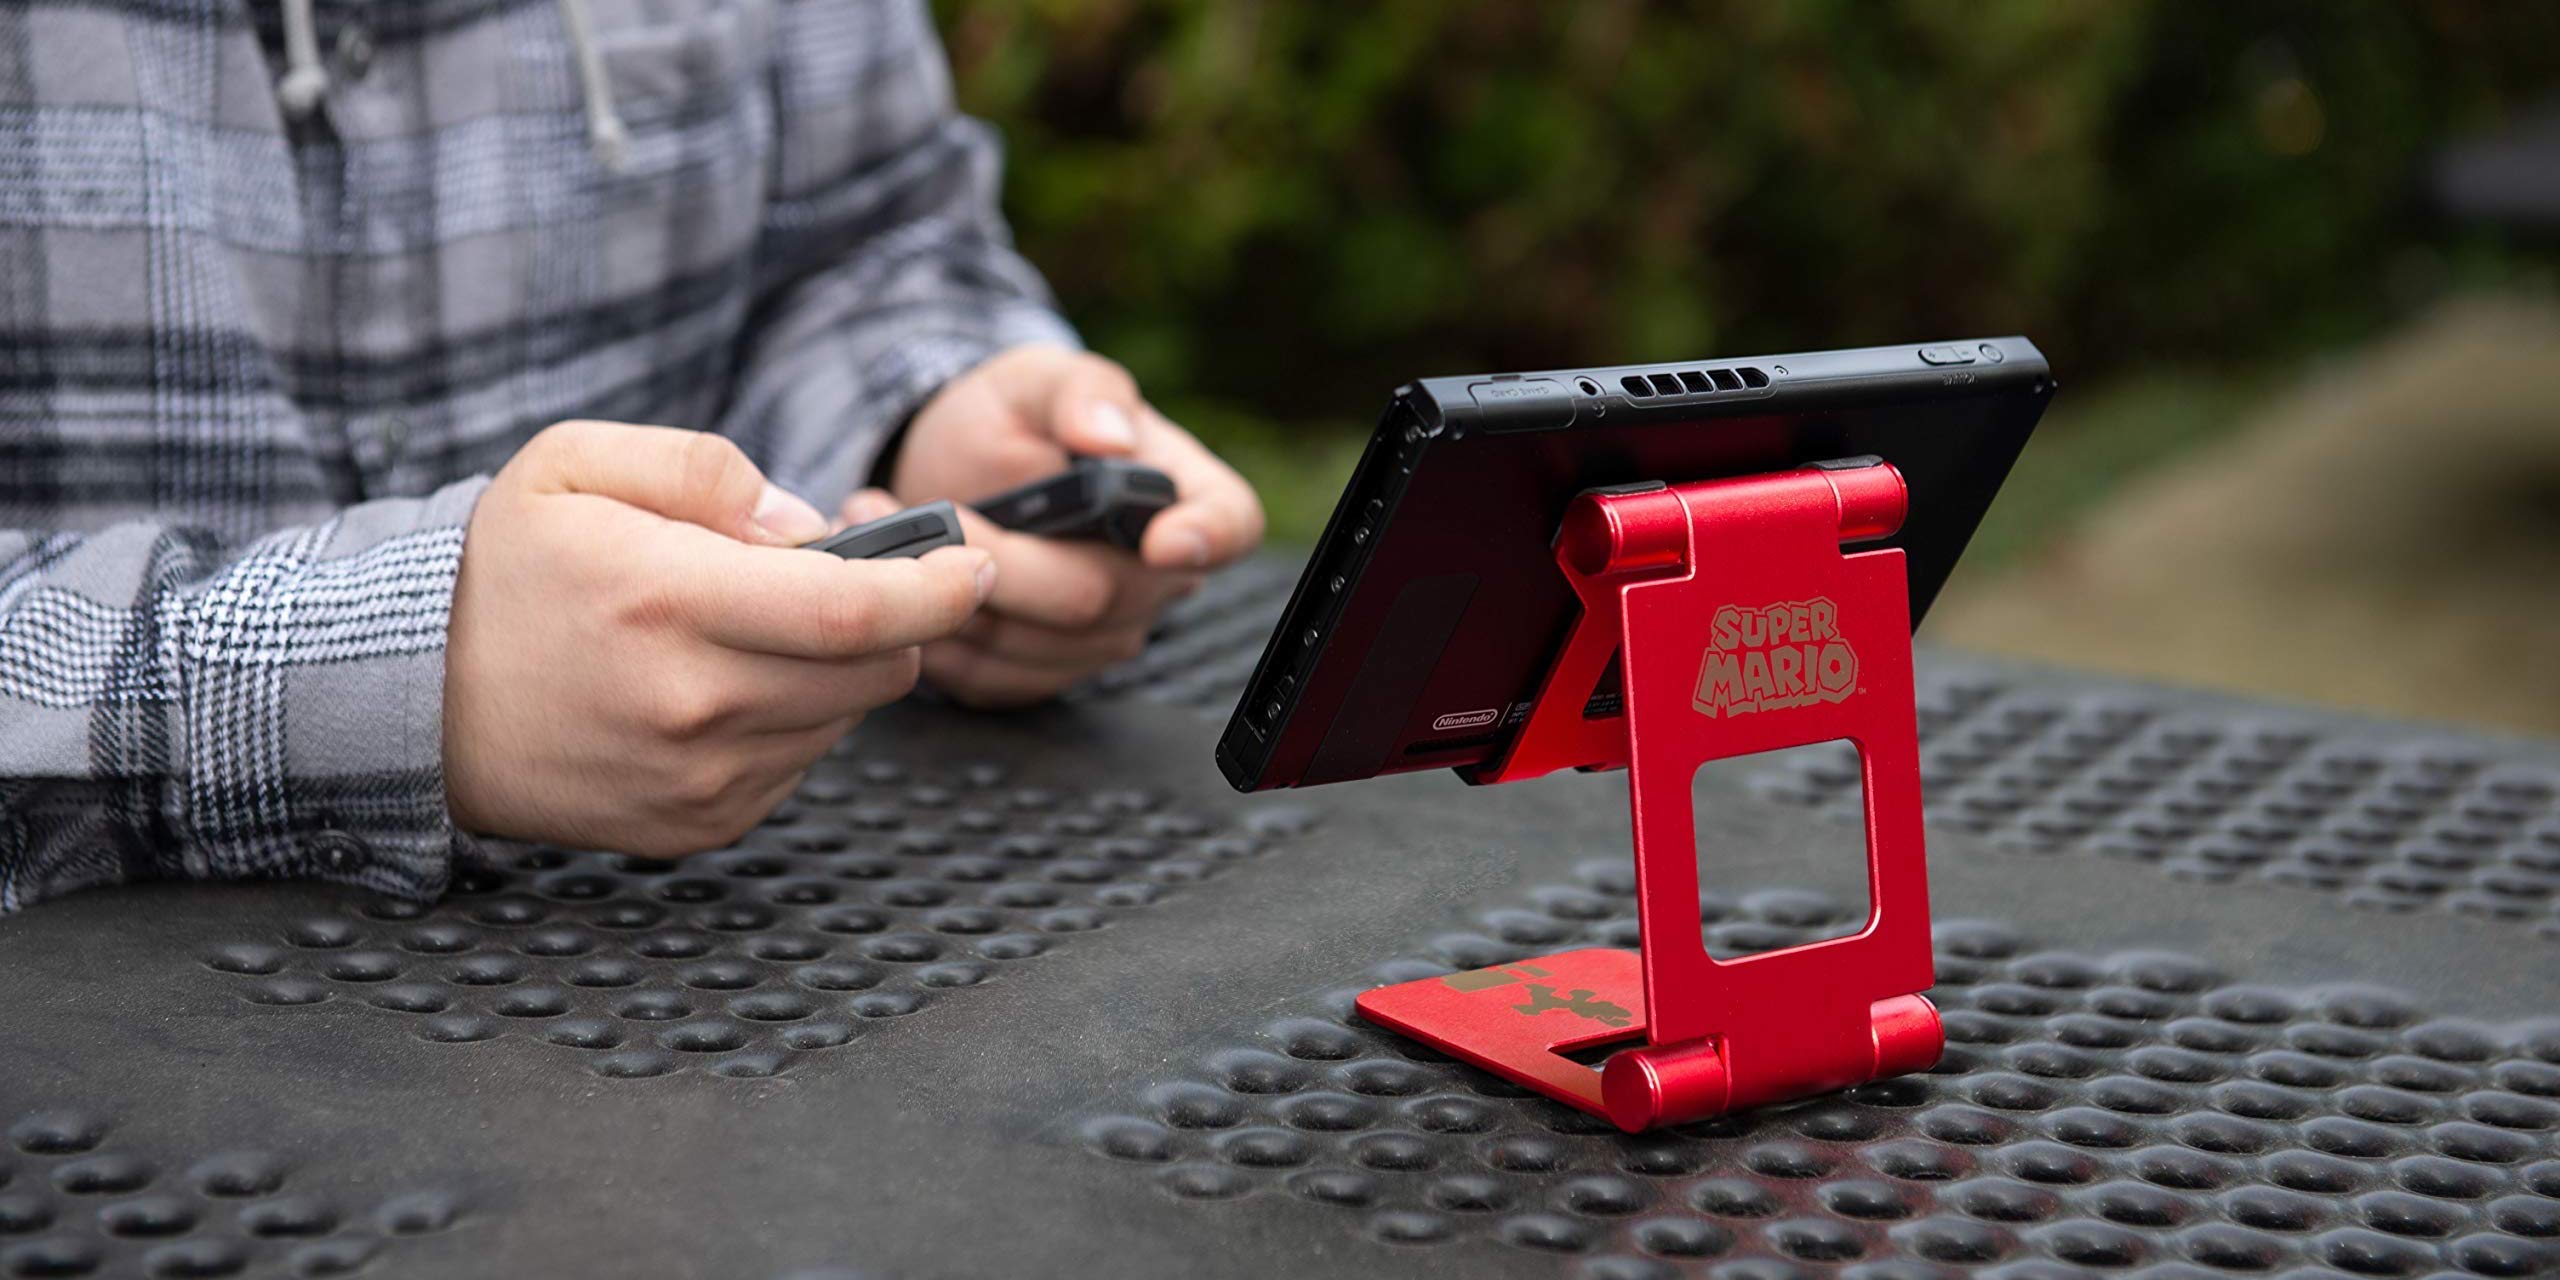 Super Mario Edition Nintendo Switch Stand is yours $10 today (Reg. $15+)